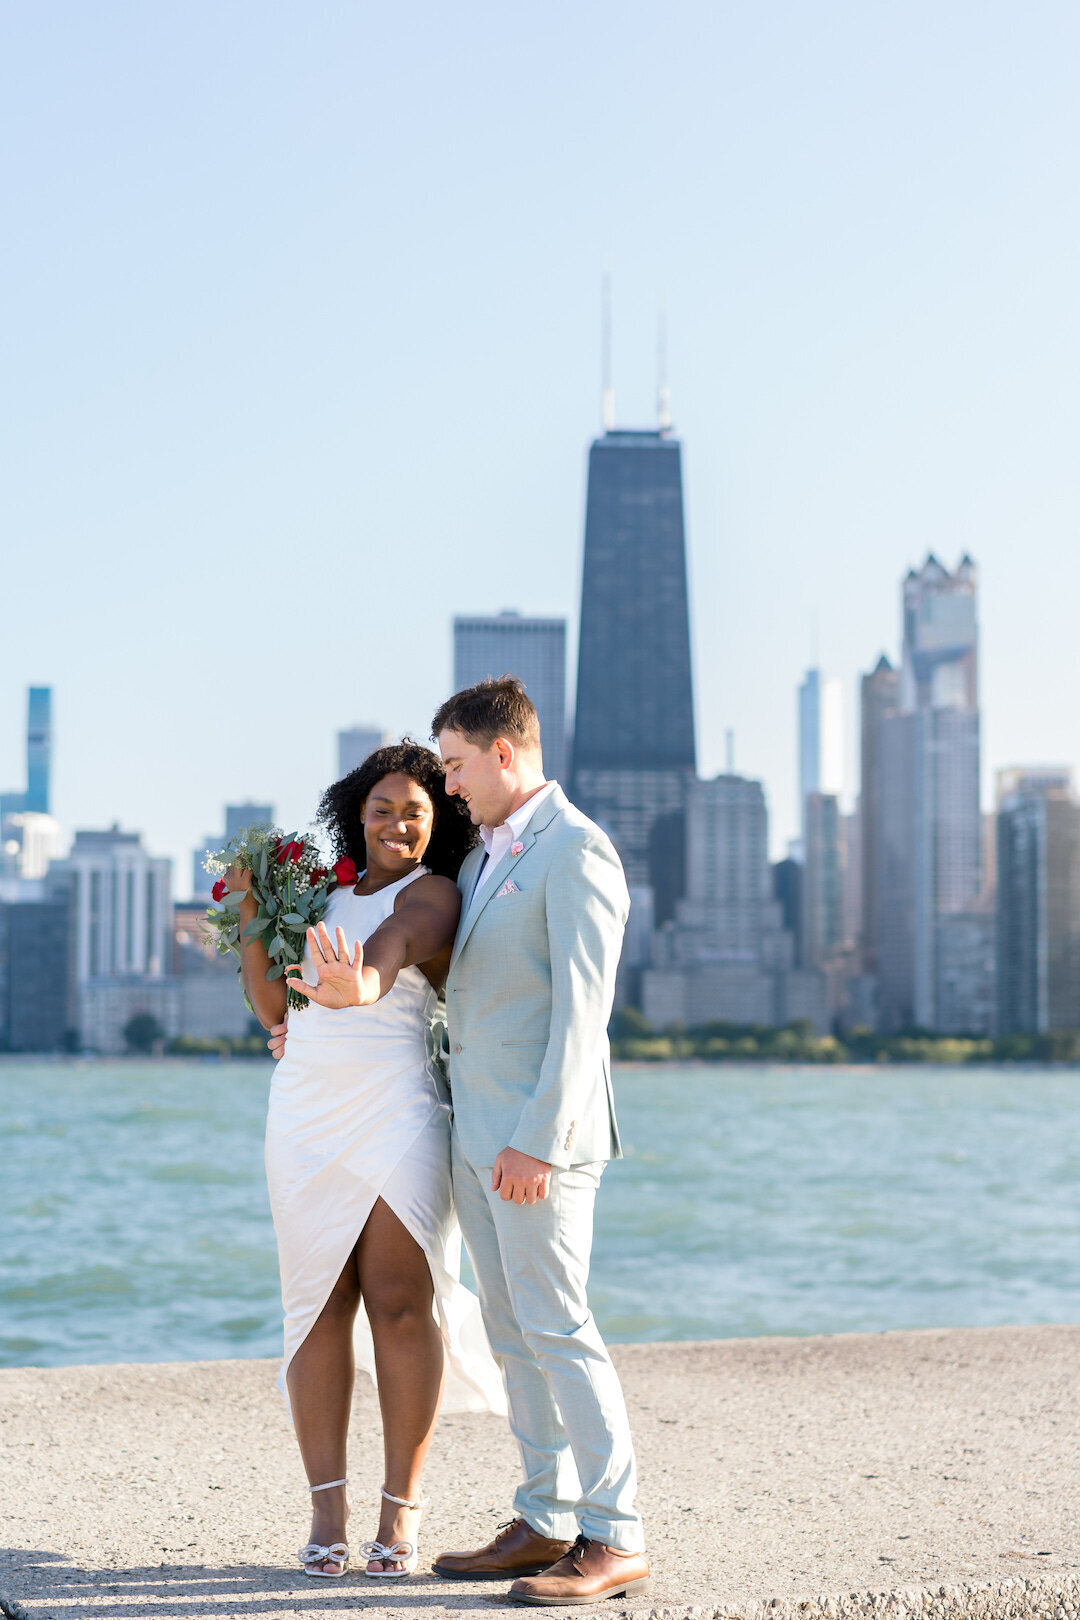 Eliana-Melmed-Photography-Chicago-Couples-Photography-Deluxe-11